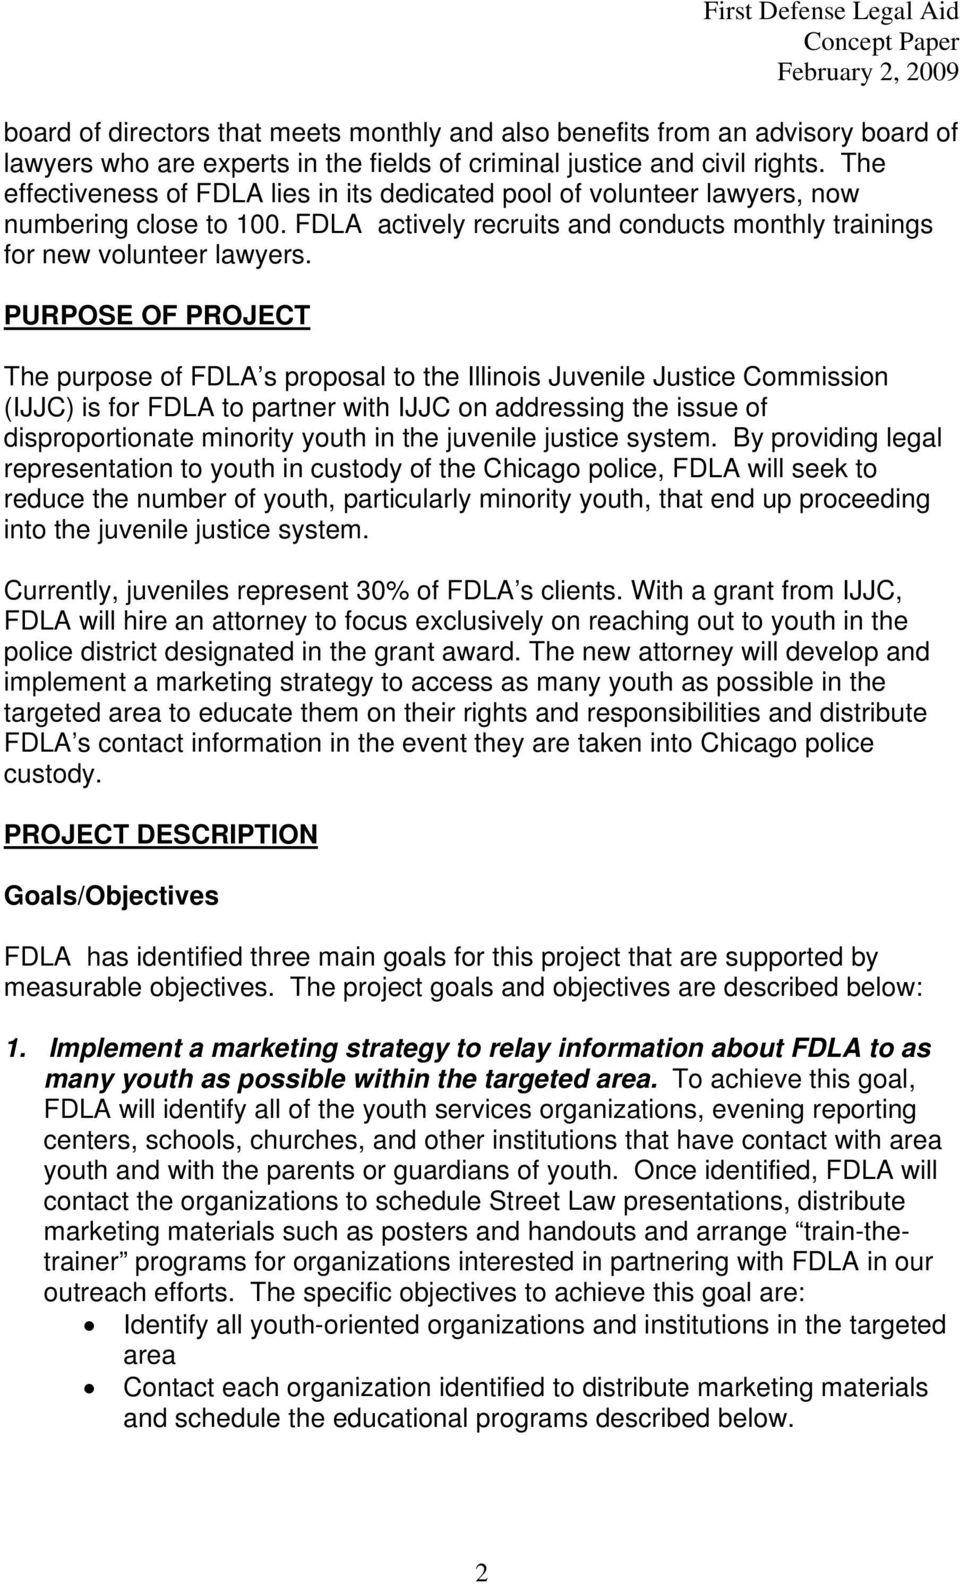 PURPOSE OF PROJECT The purpose of FDLA s proposal to the Illinois Juvenile Justice Commission (IJJC) is for FDLA to partner with IJJC on addressing the issue of disproportionate minority youth in the